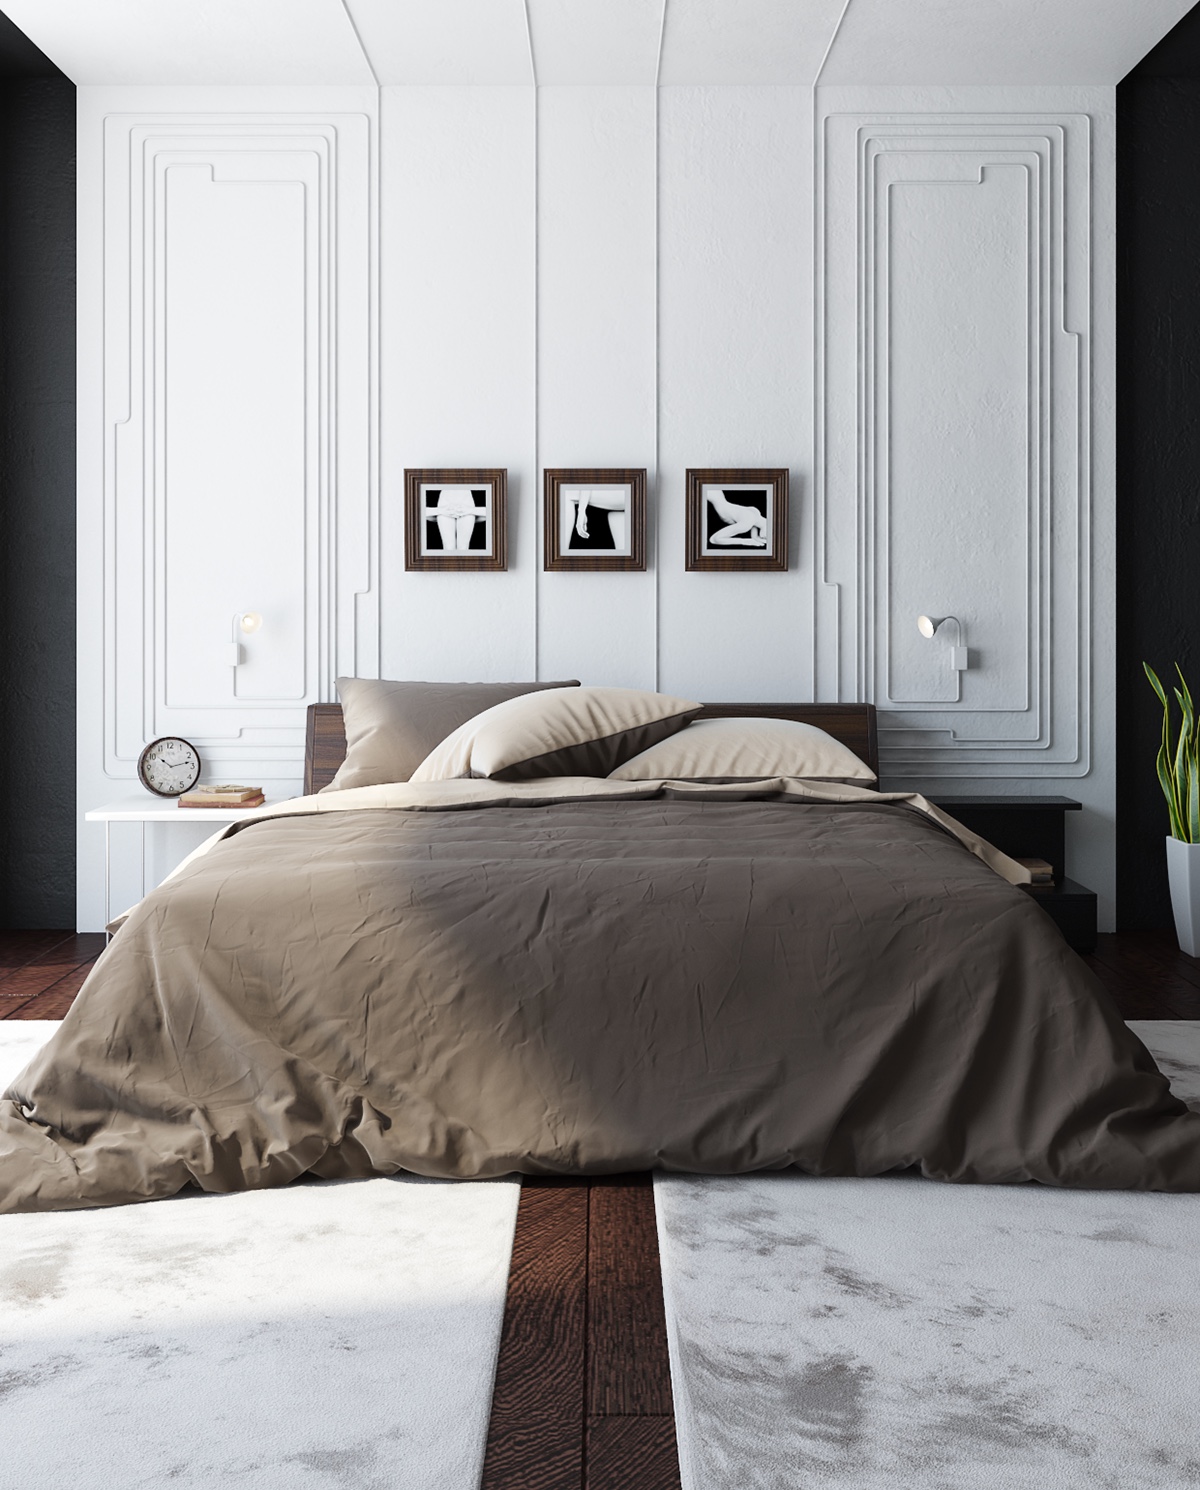 Black And White Master Bedroom Shows The Stretch Of The Monochromatic